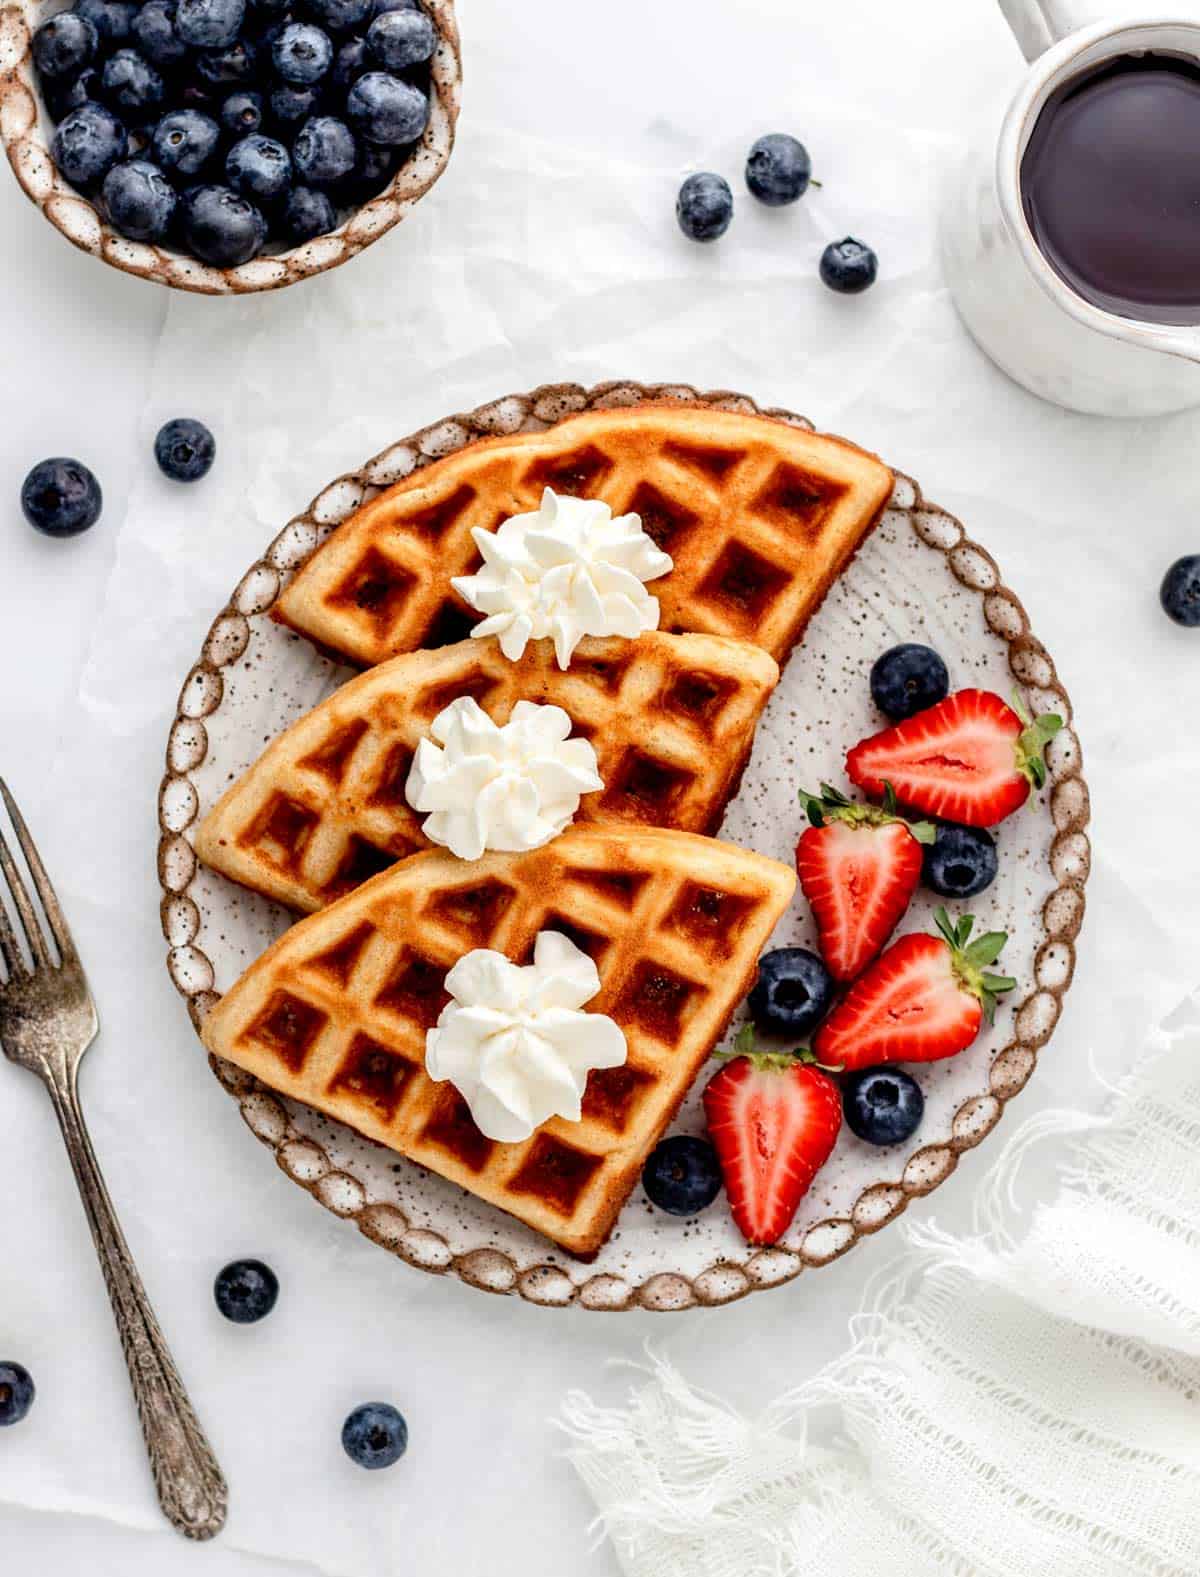 An overhead image of almond flour waffles on a plate with whipepd cream and fresh berries.